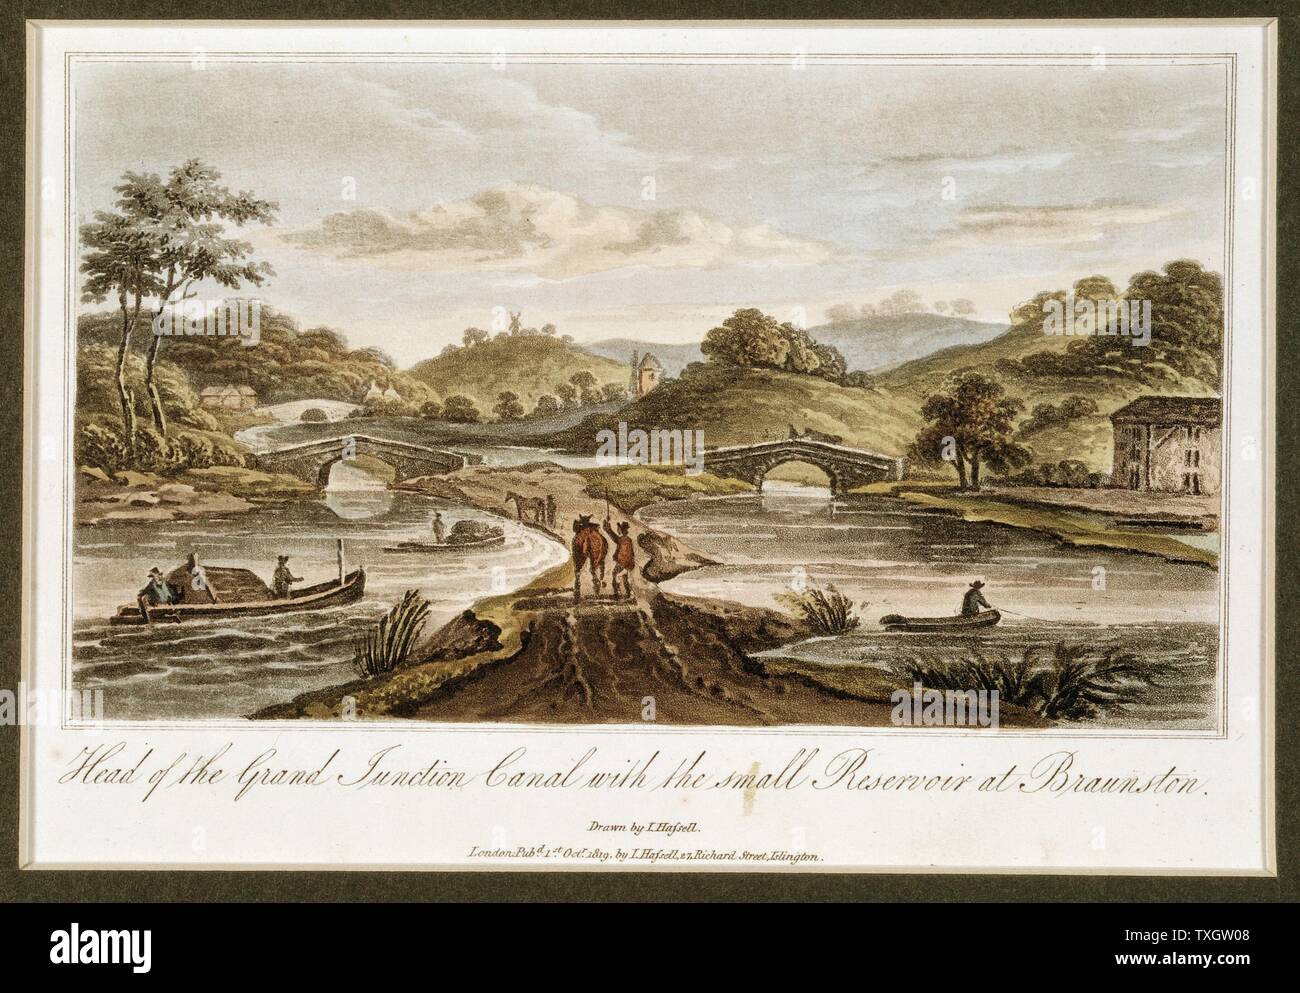 Grand Junction Canal: Head of canal at Braunston, Northamptonshire, showing small reservoir. Part of network linking London with Midlands manufacturing towns, and with Liverpool. Chief engineer: William Jessop, Resident engineer: James Barnes 1819 From J.Hassell 'Tour of the Grand Junction Canal' Aquatint London Stock Photo